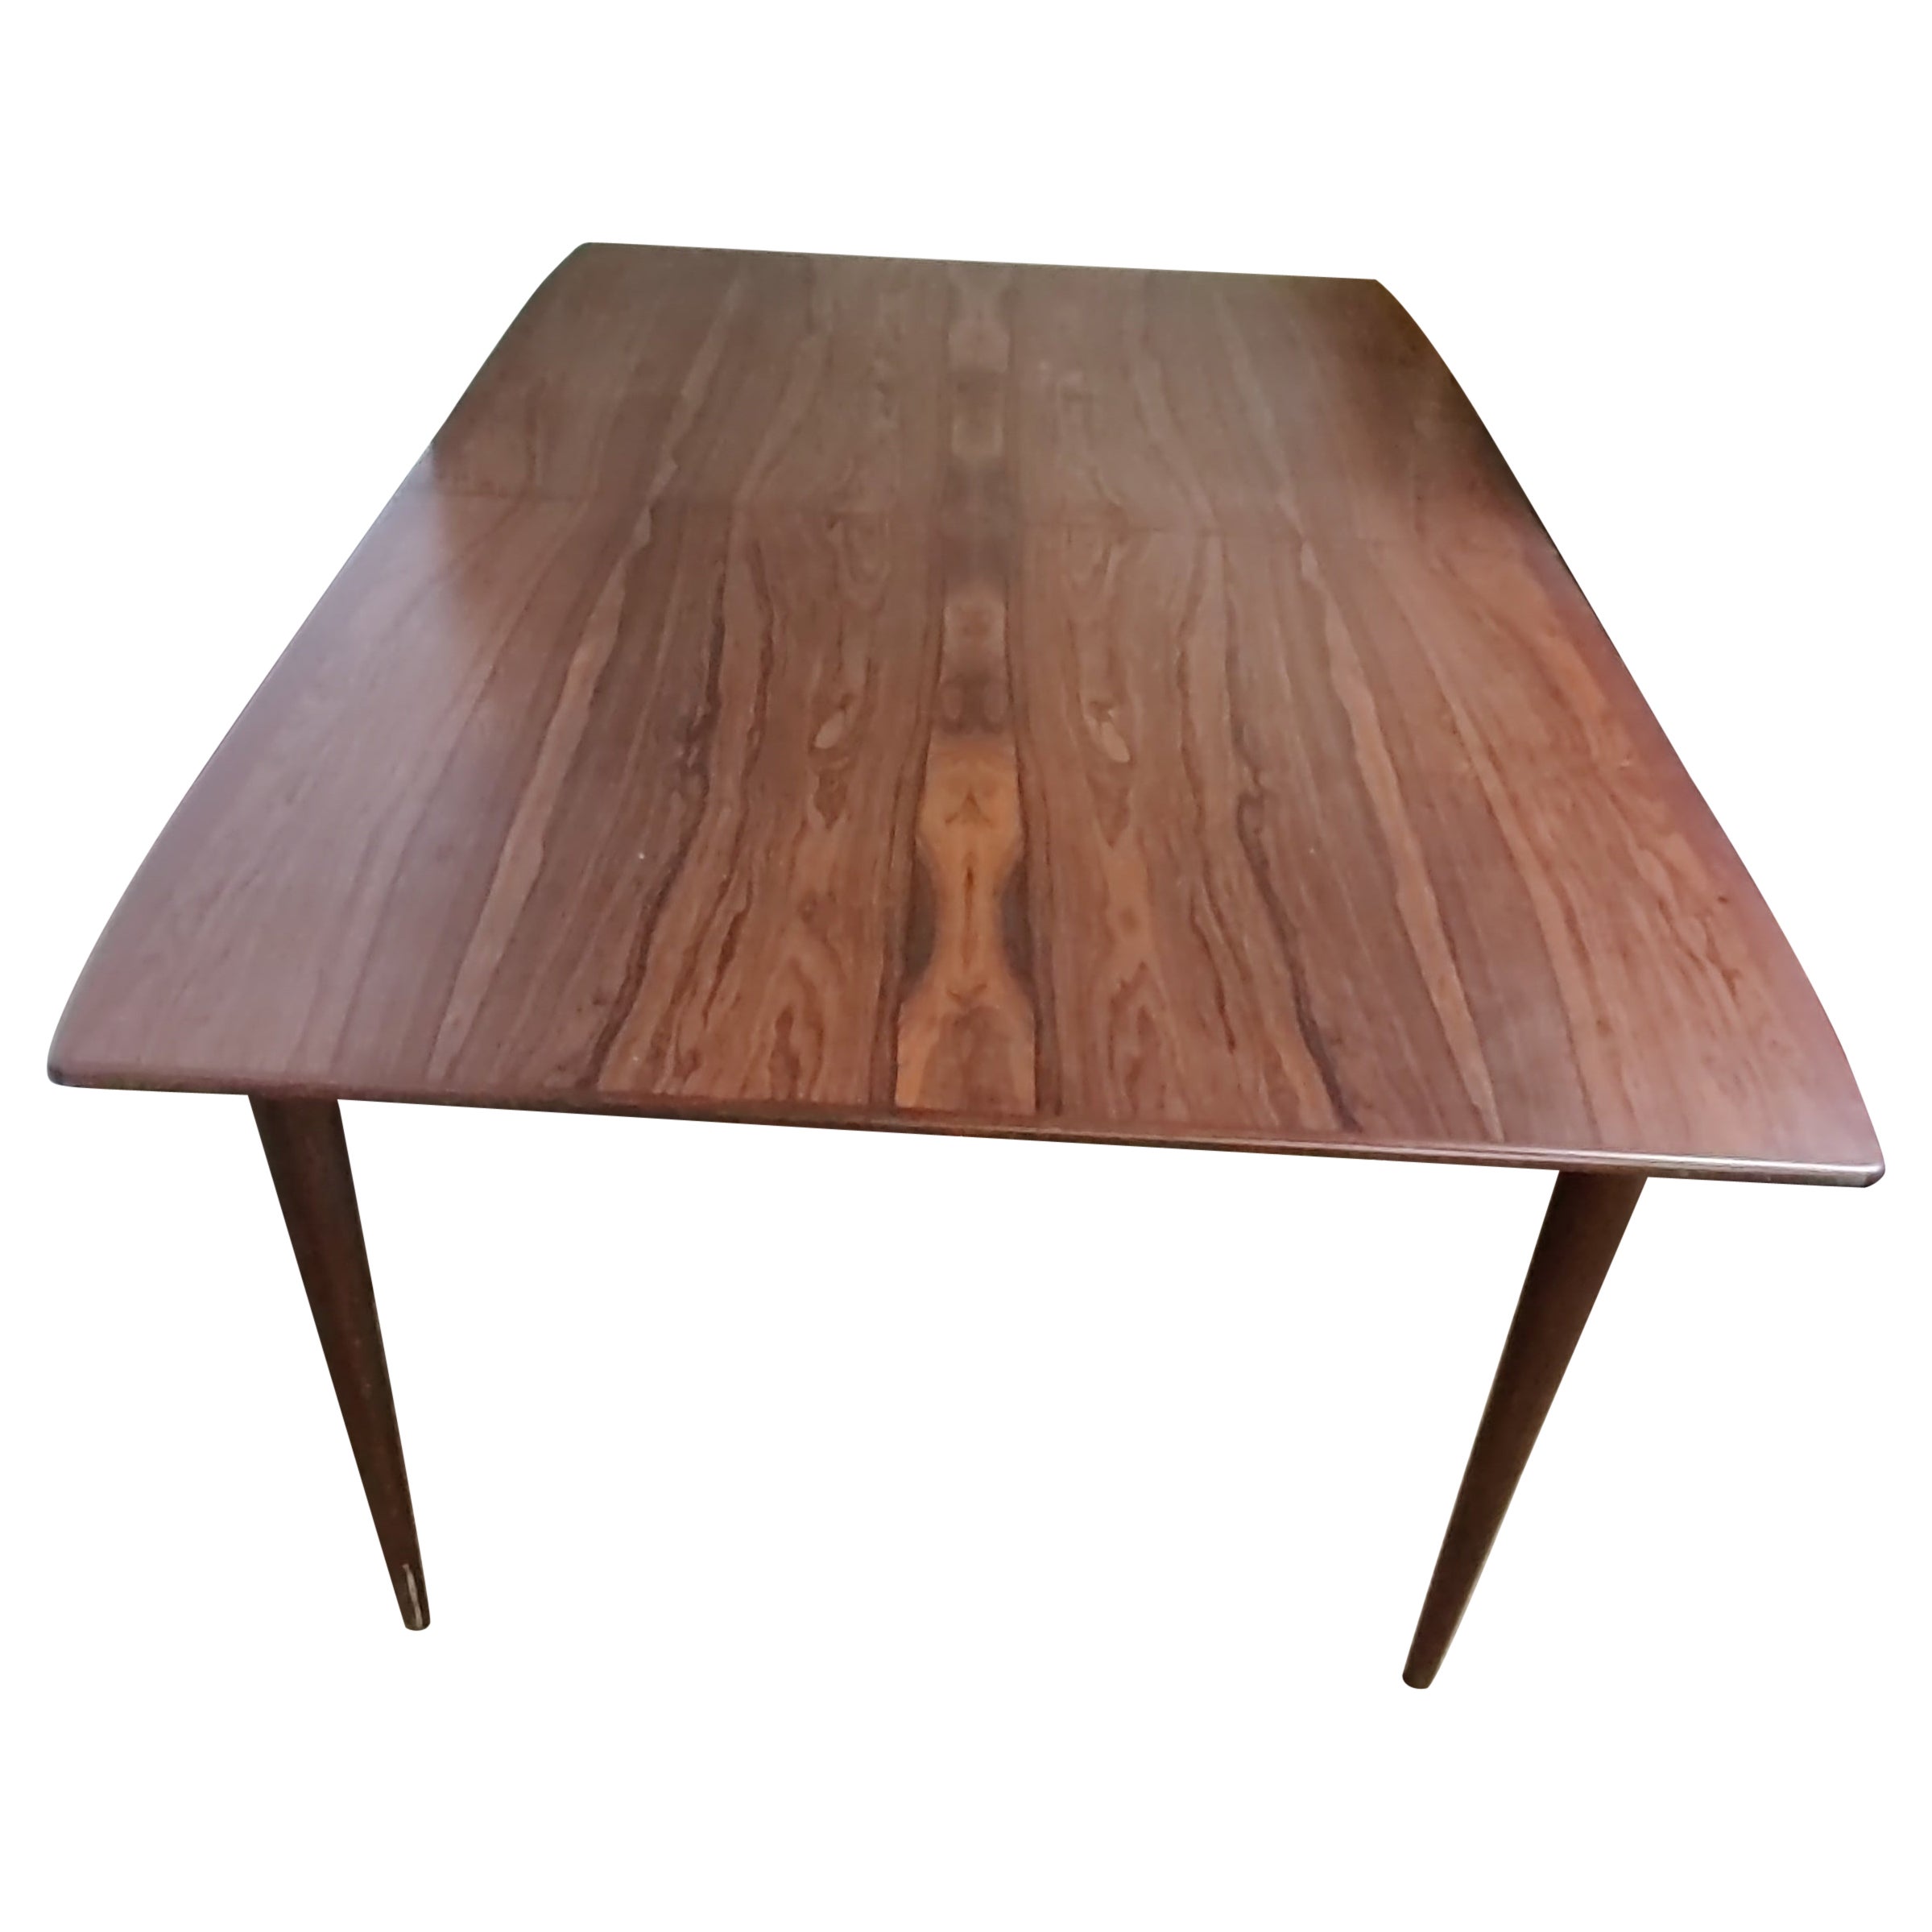 Mid-20th Century Mid Century Modern Rosewood Dining Table 2 Leafs by Seffle Sweden